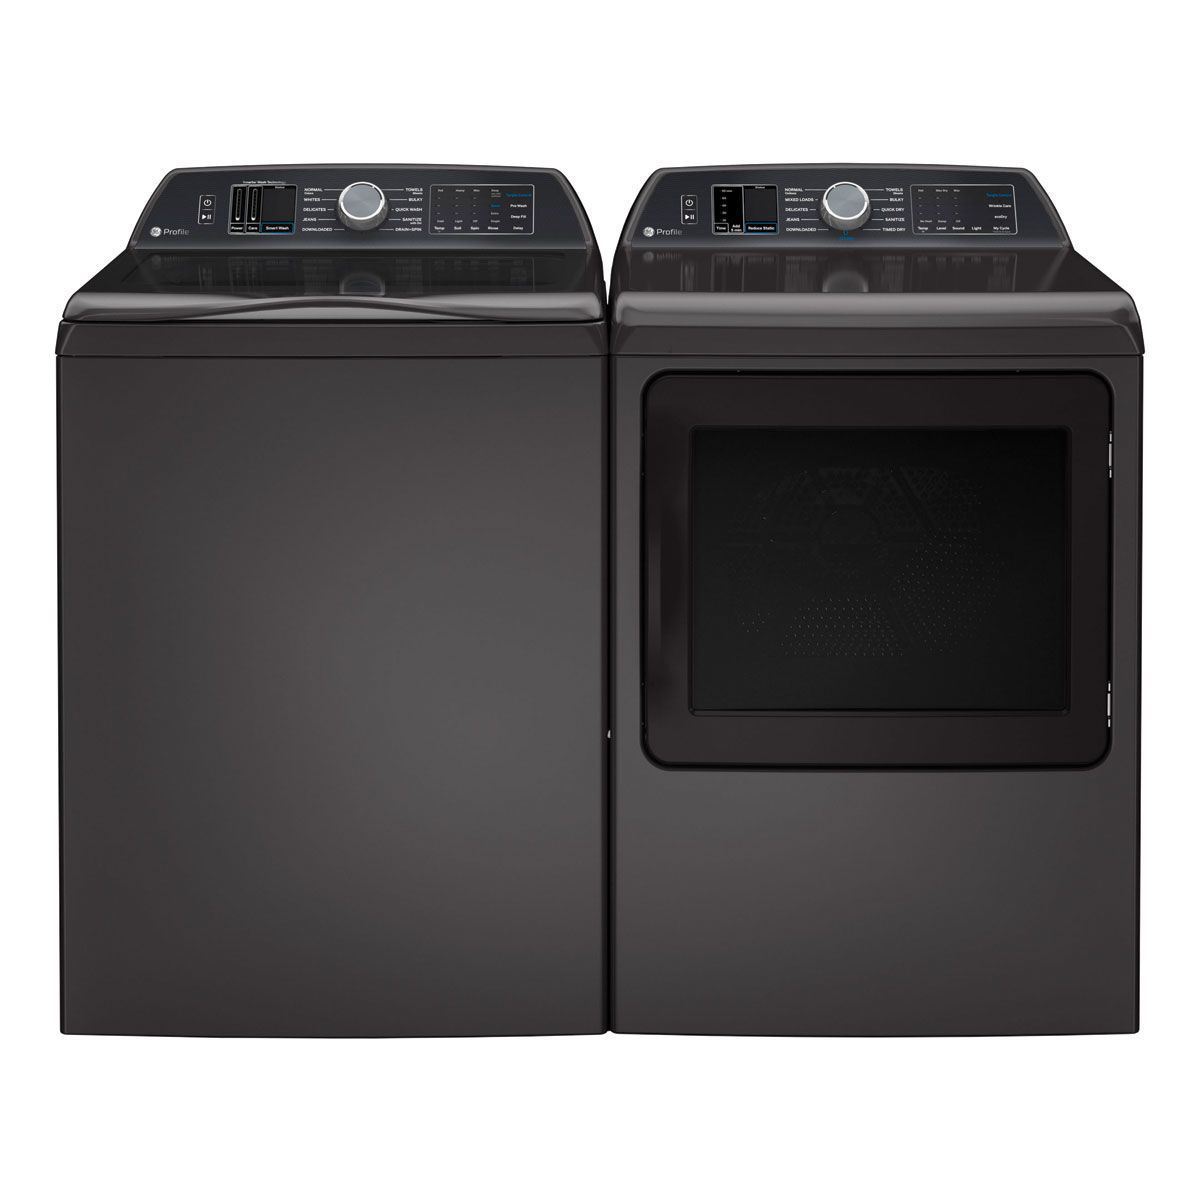 Picture of GE Profile Top Load Washer & Dryer Pair